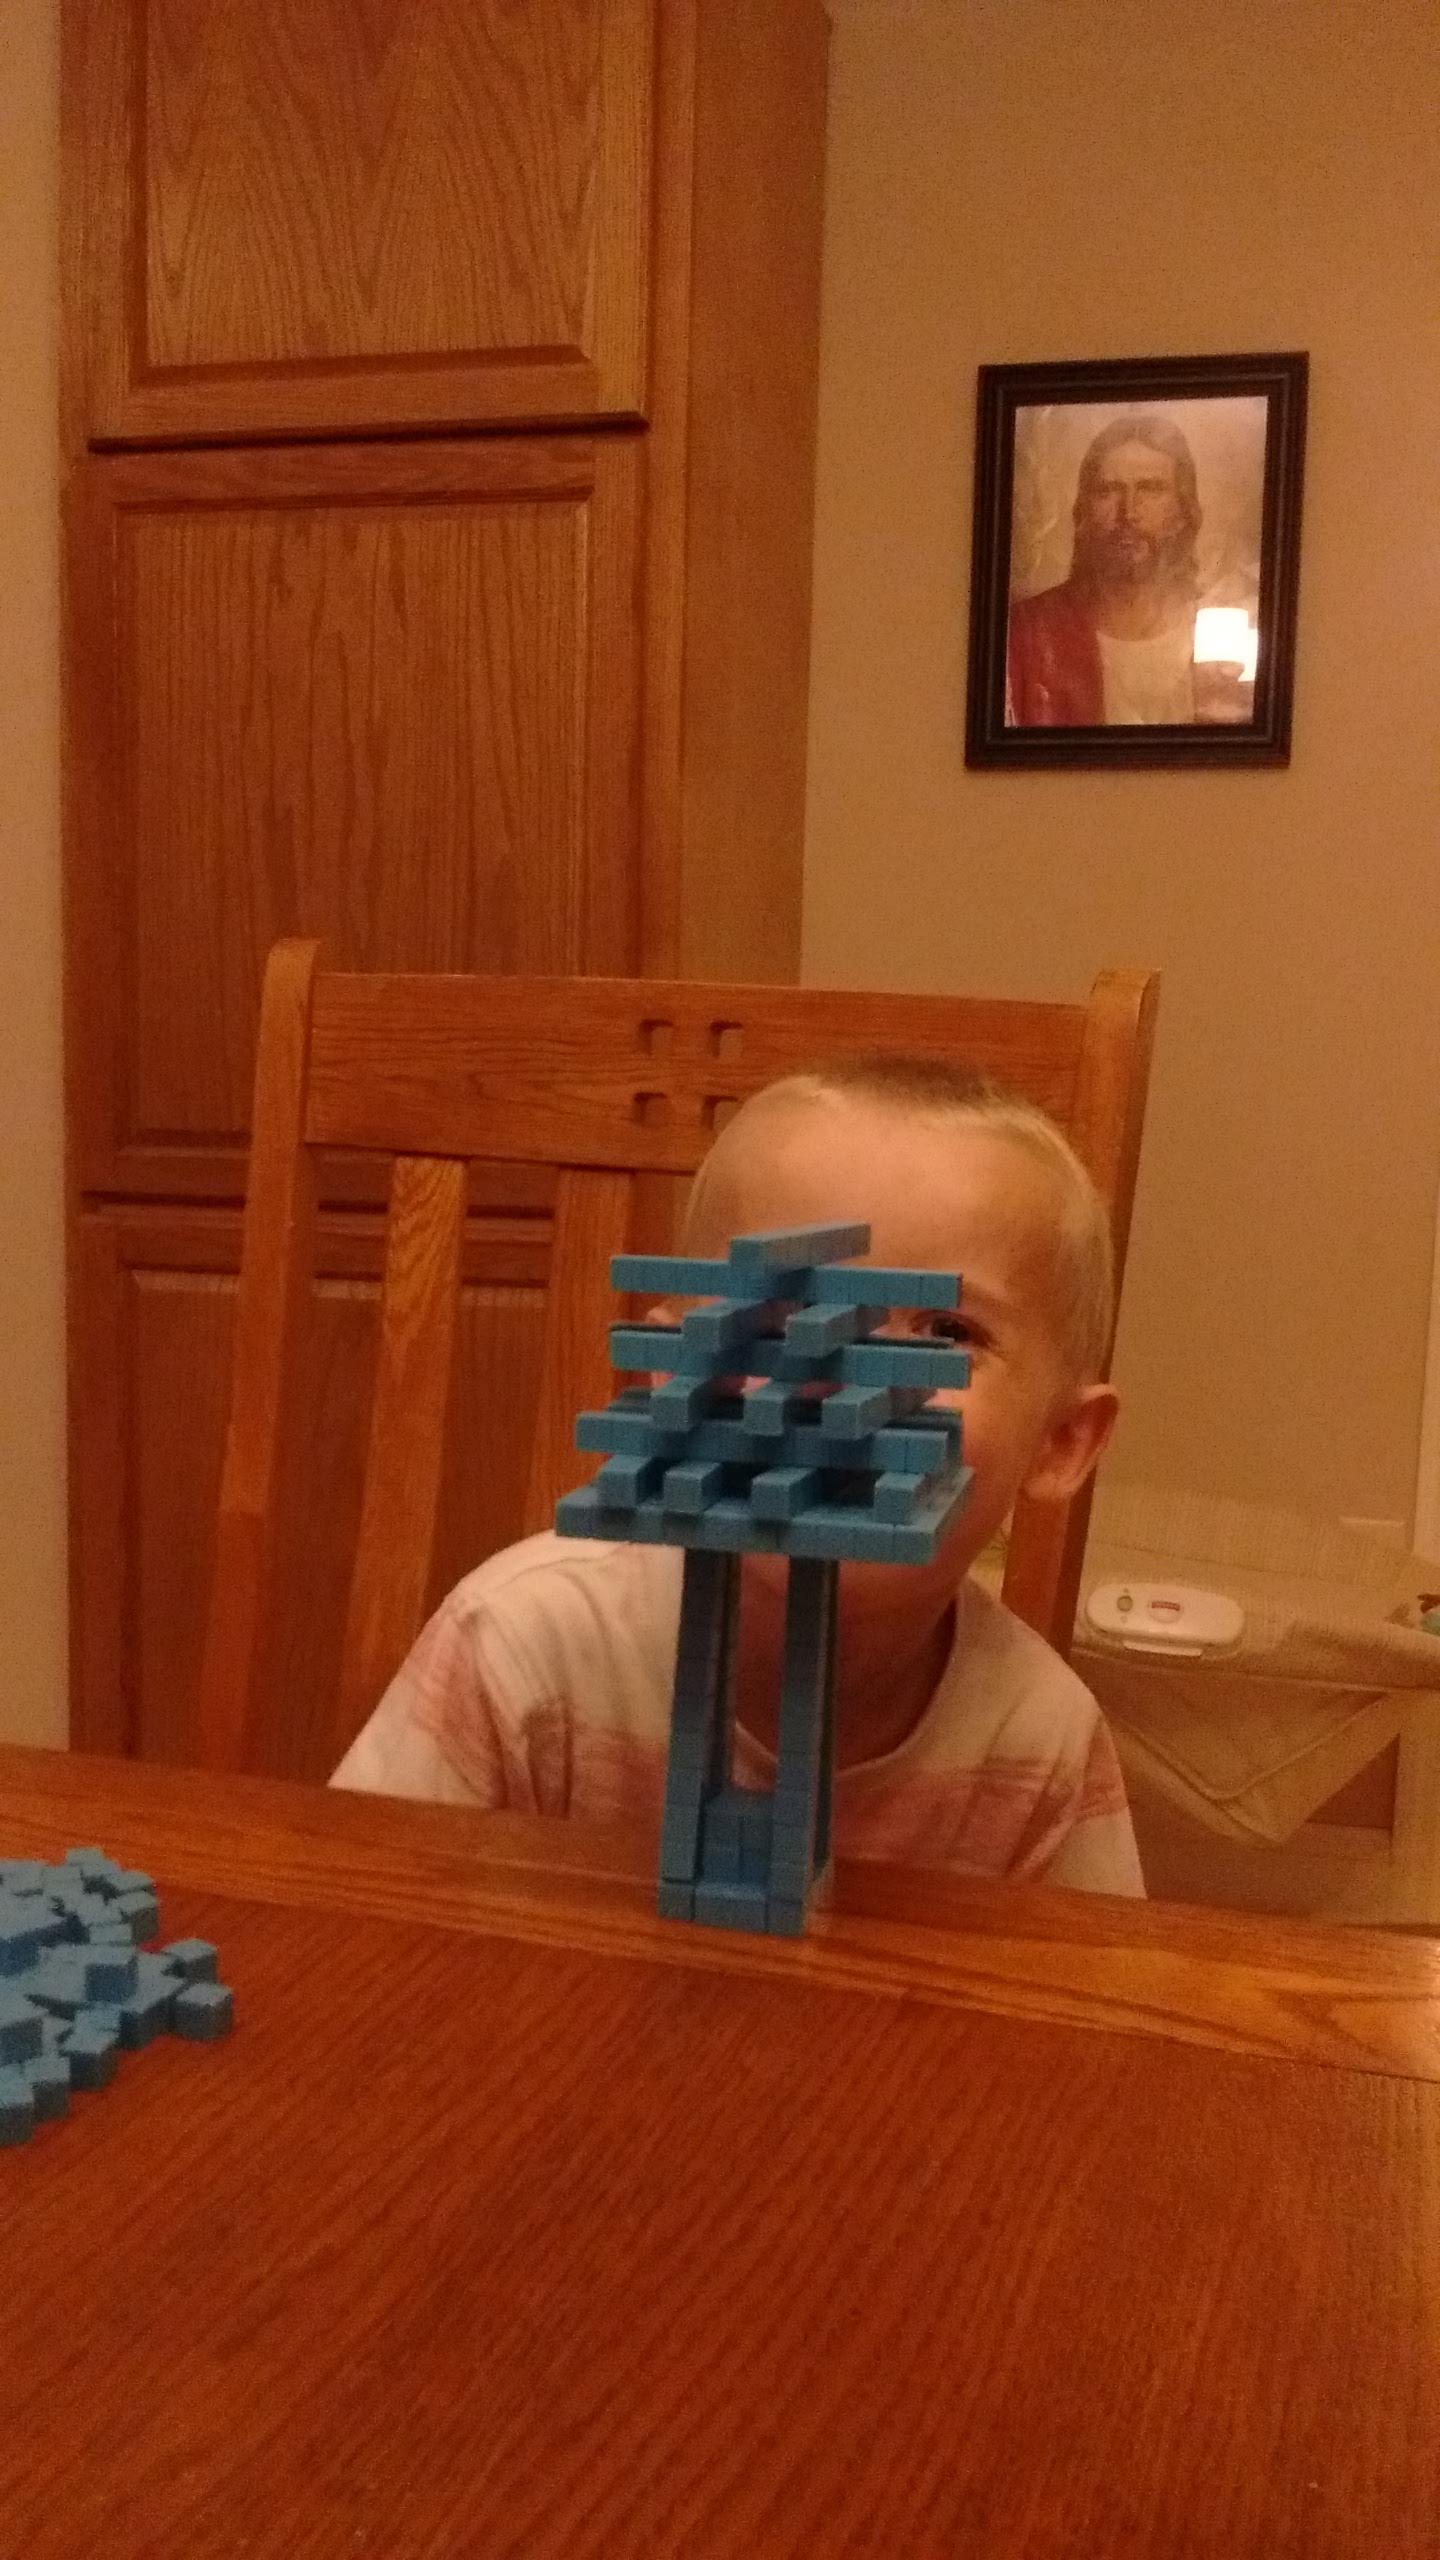 a child balancing tiny base ten blocks on each other